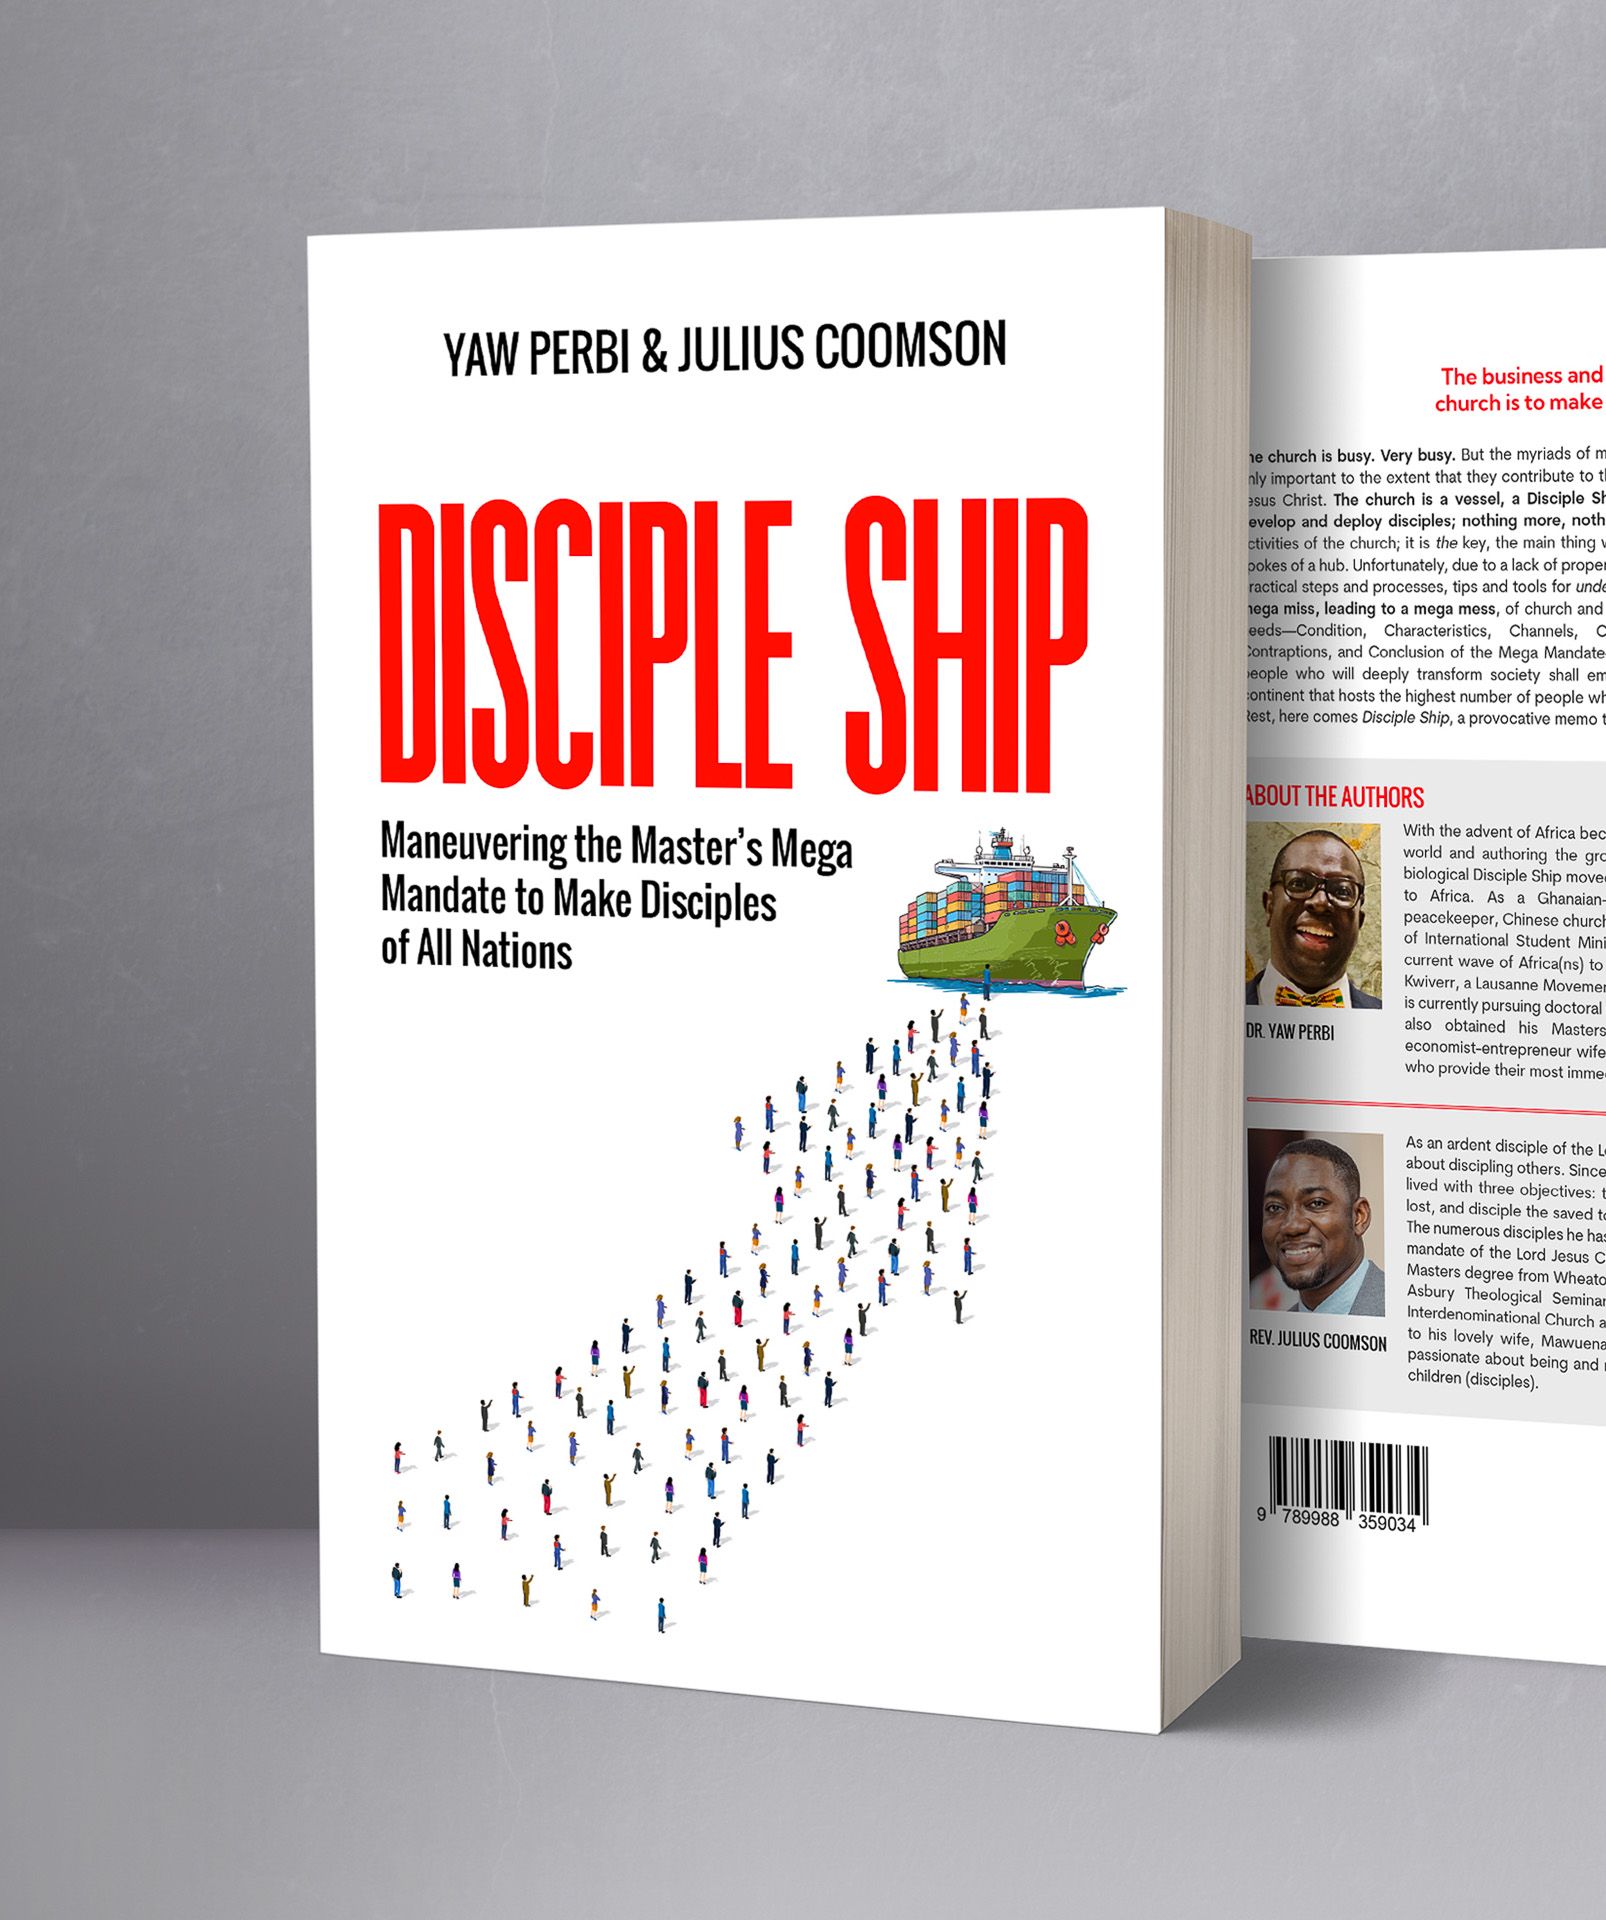 ThirdLaw branding and web design - Disciple Ship Cover